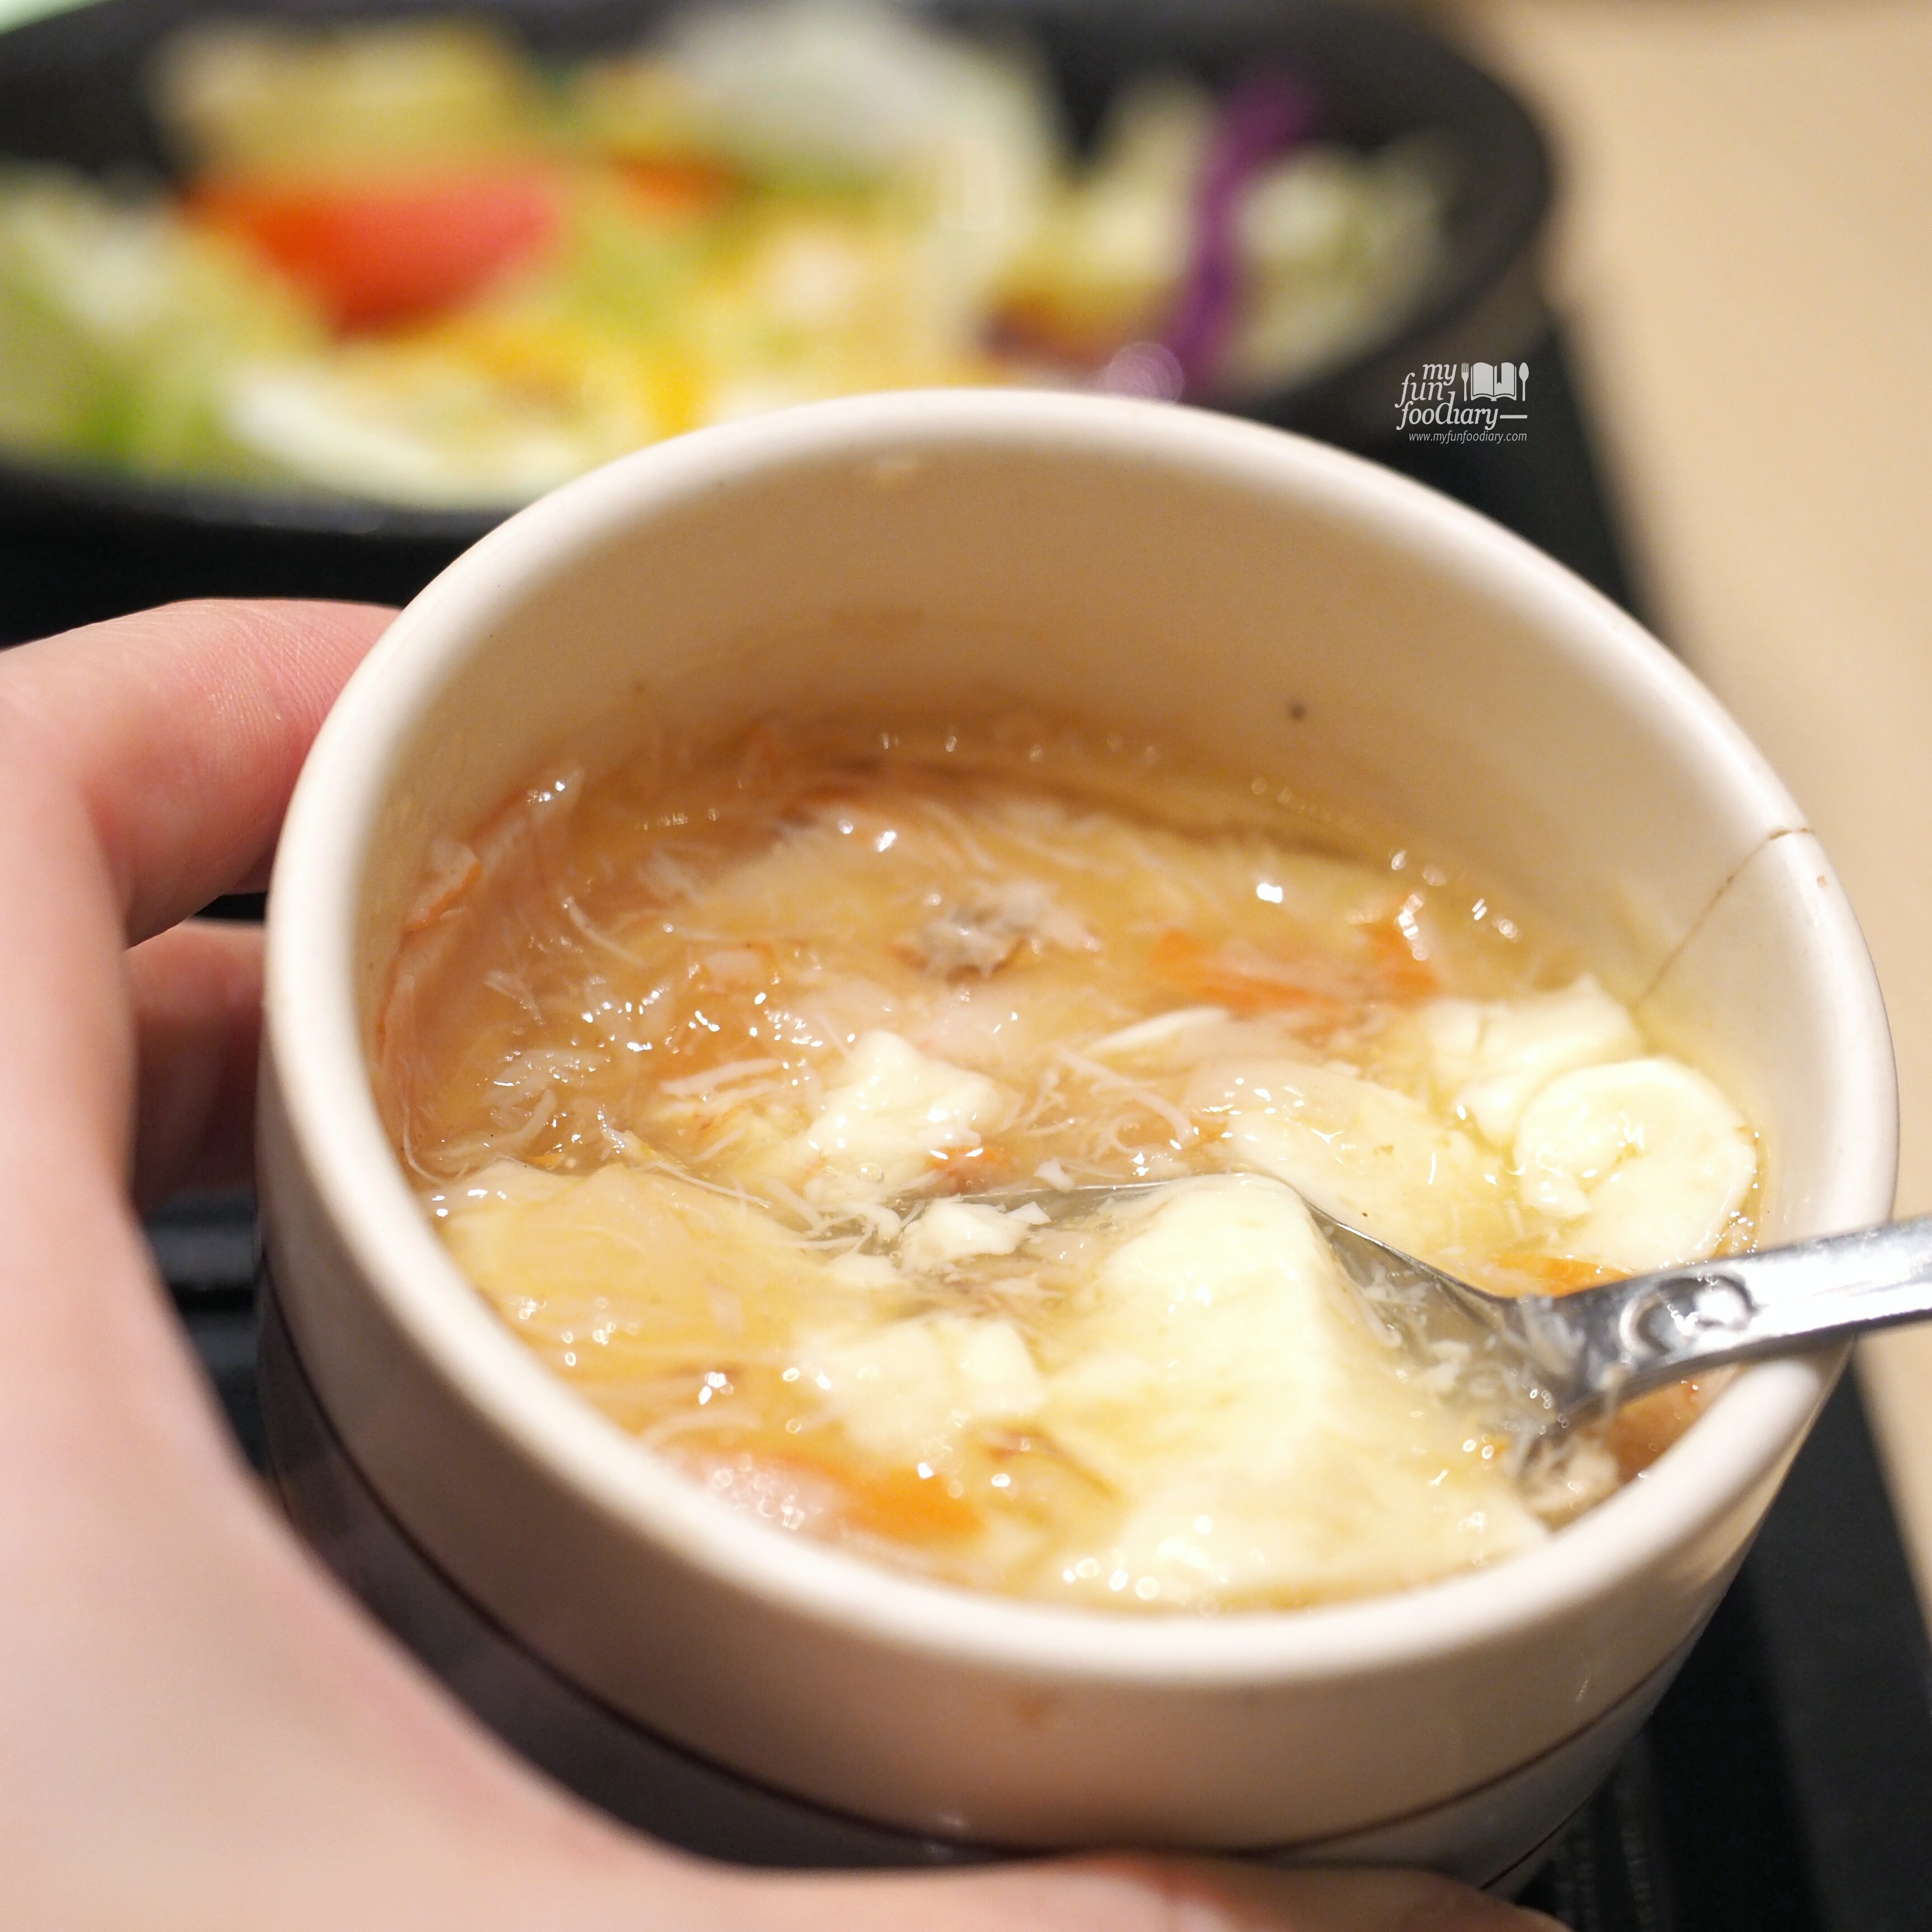 Crab Steamed Egg at Itacho Sushi by Myfunfoodiary